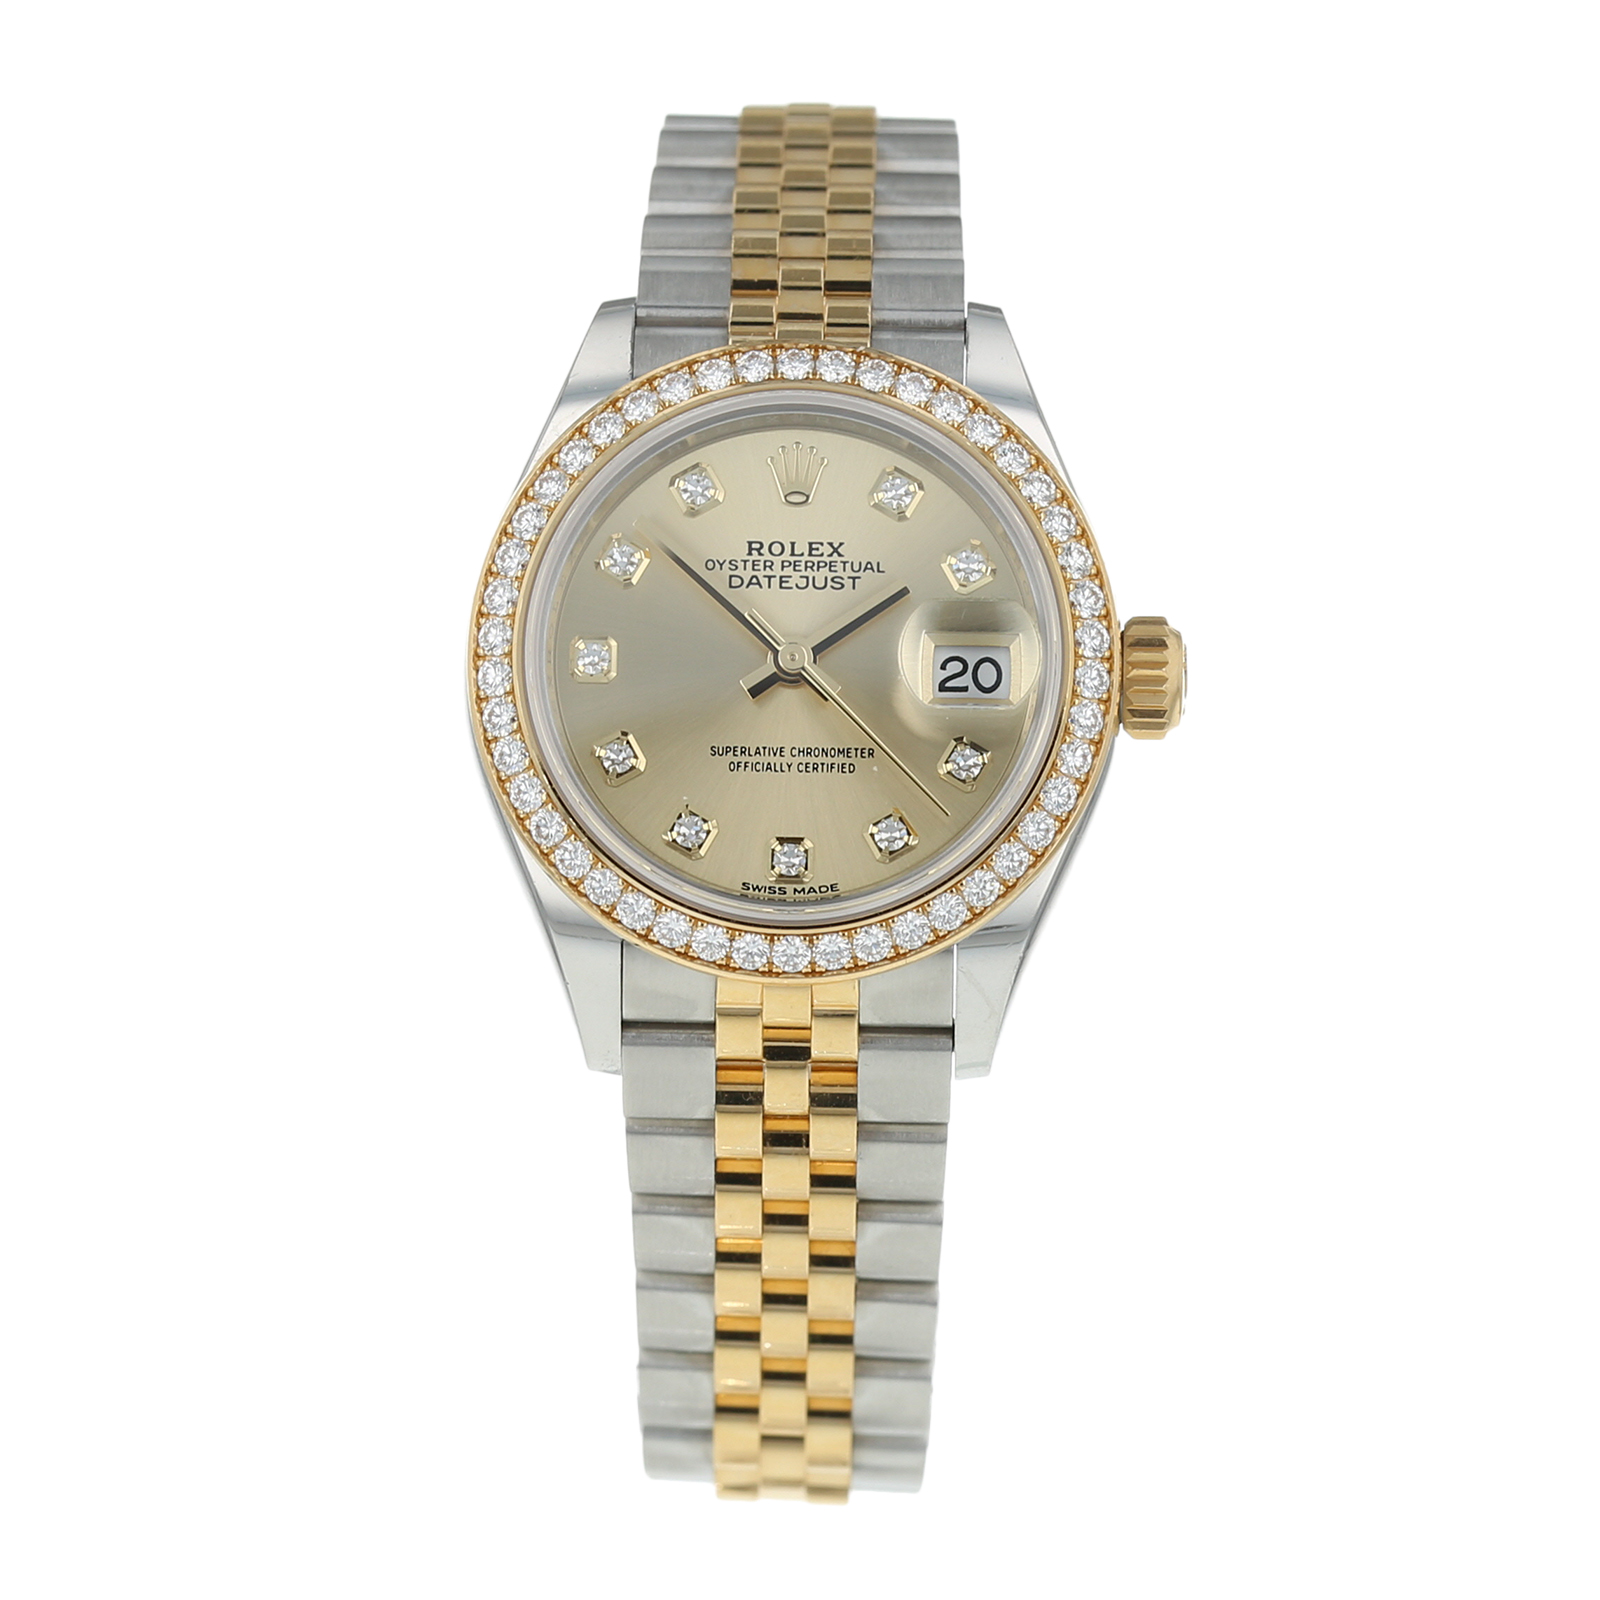 pre owned rolex watches